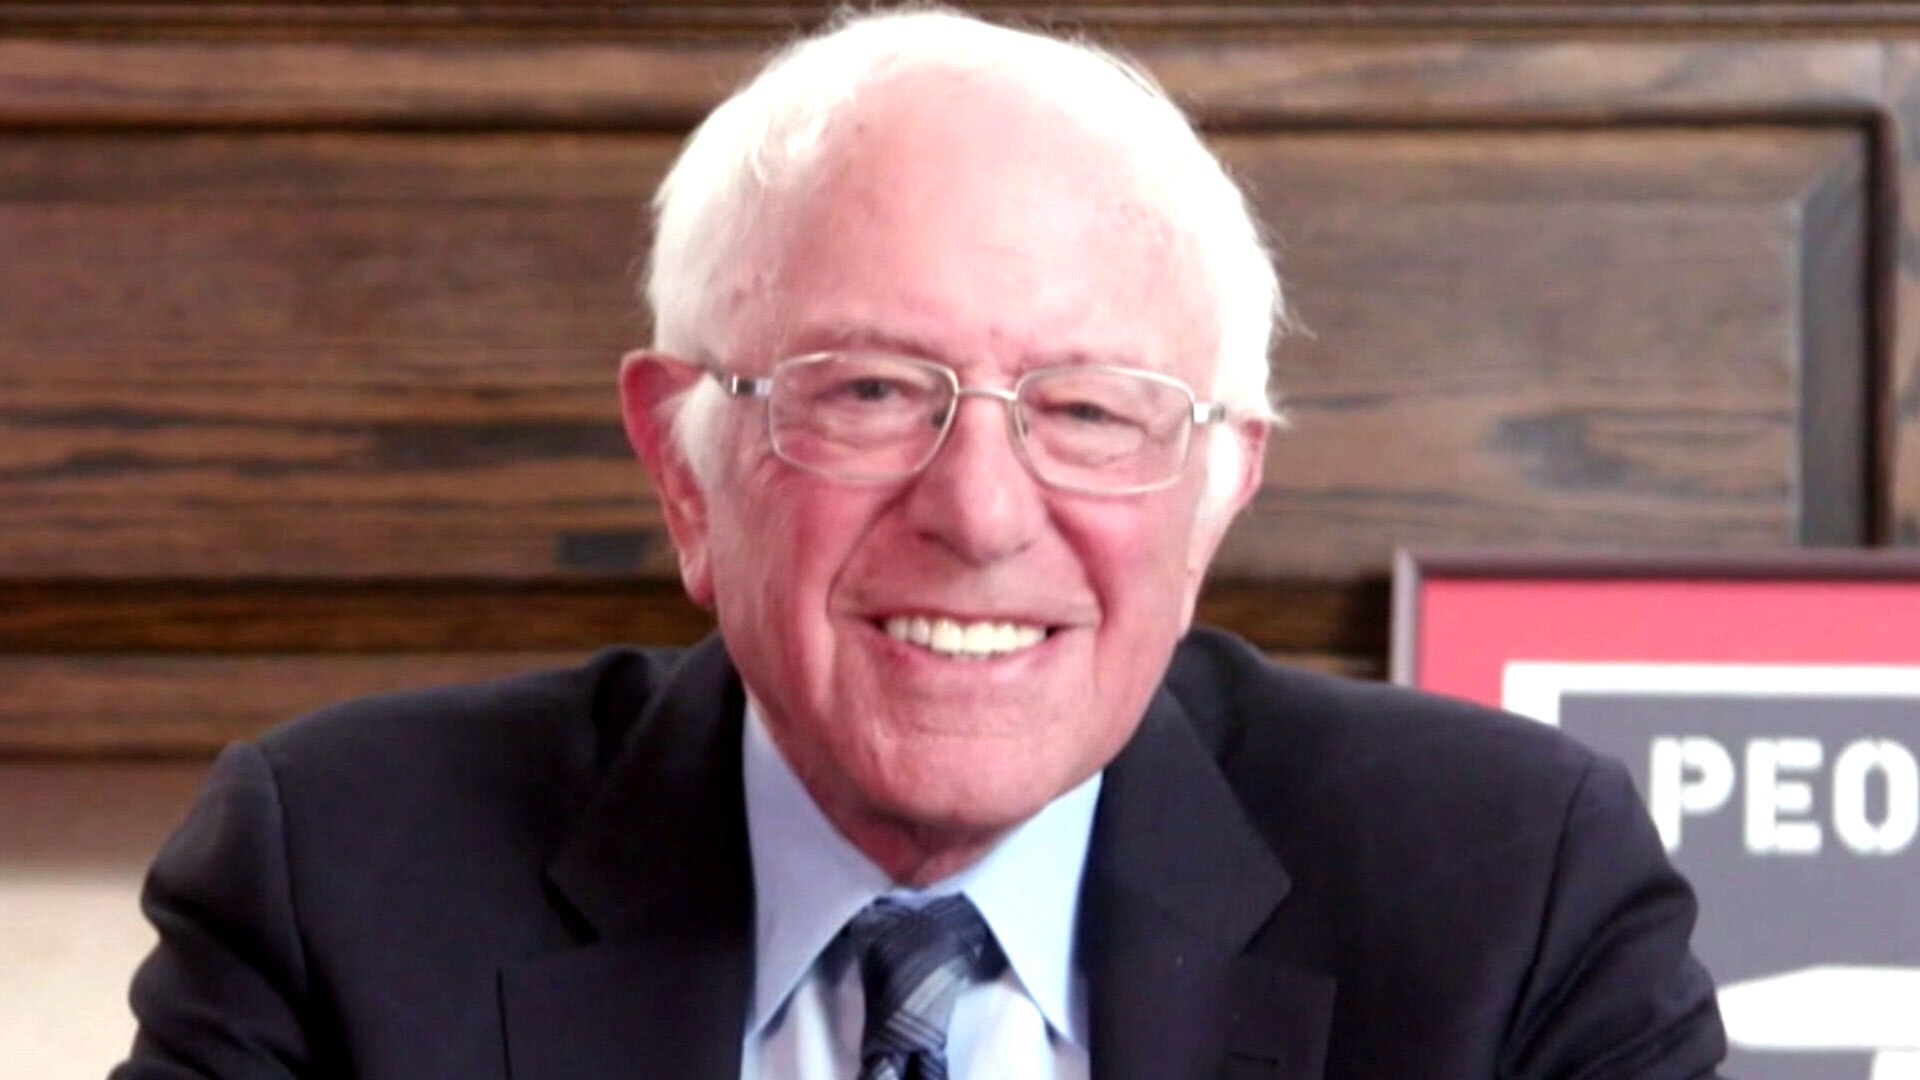 Watch Late Night With Seth Meyers Interview Sen Bernie Sanders Says The Republican Party Has 